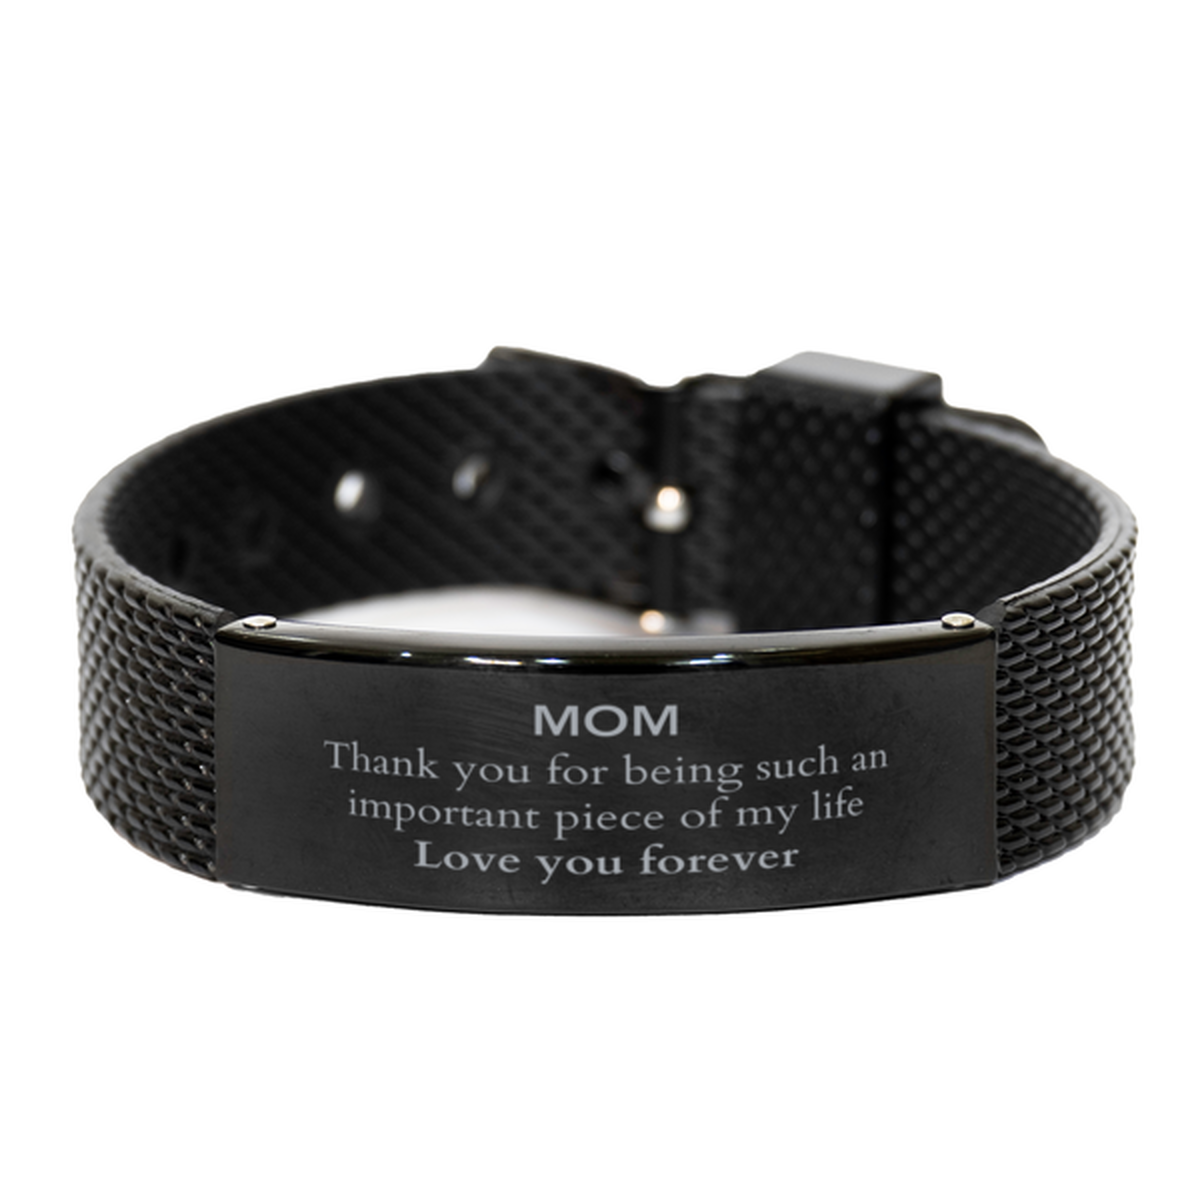 Appropriate Mom Black Shark Mesh Bracelet Epic Birthday Gifts for Mom Thank you for being such an important piece of my life Mom Christmas Mothers Fathers Day